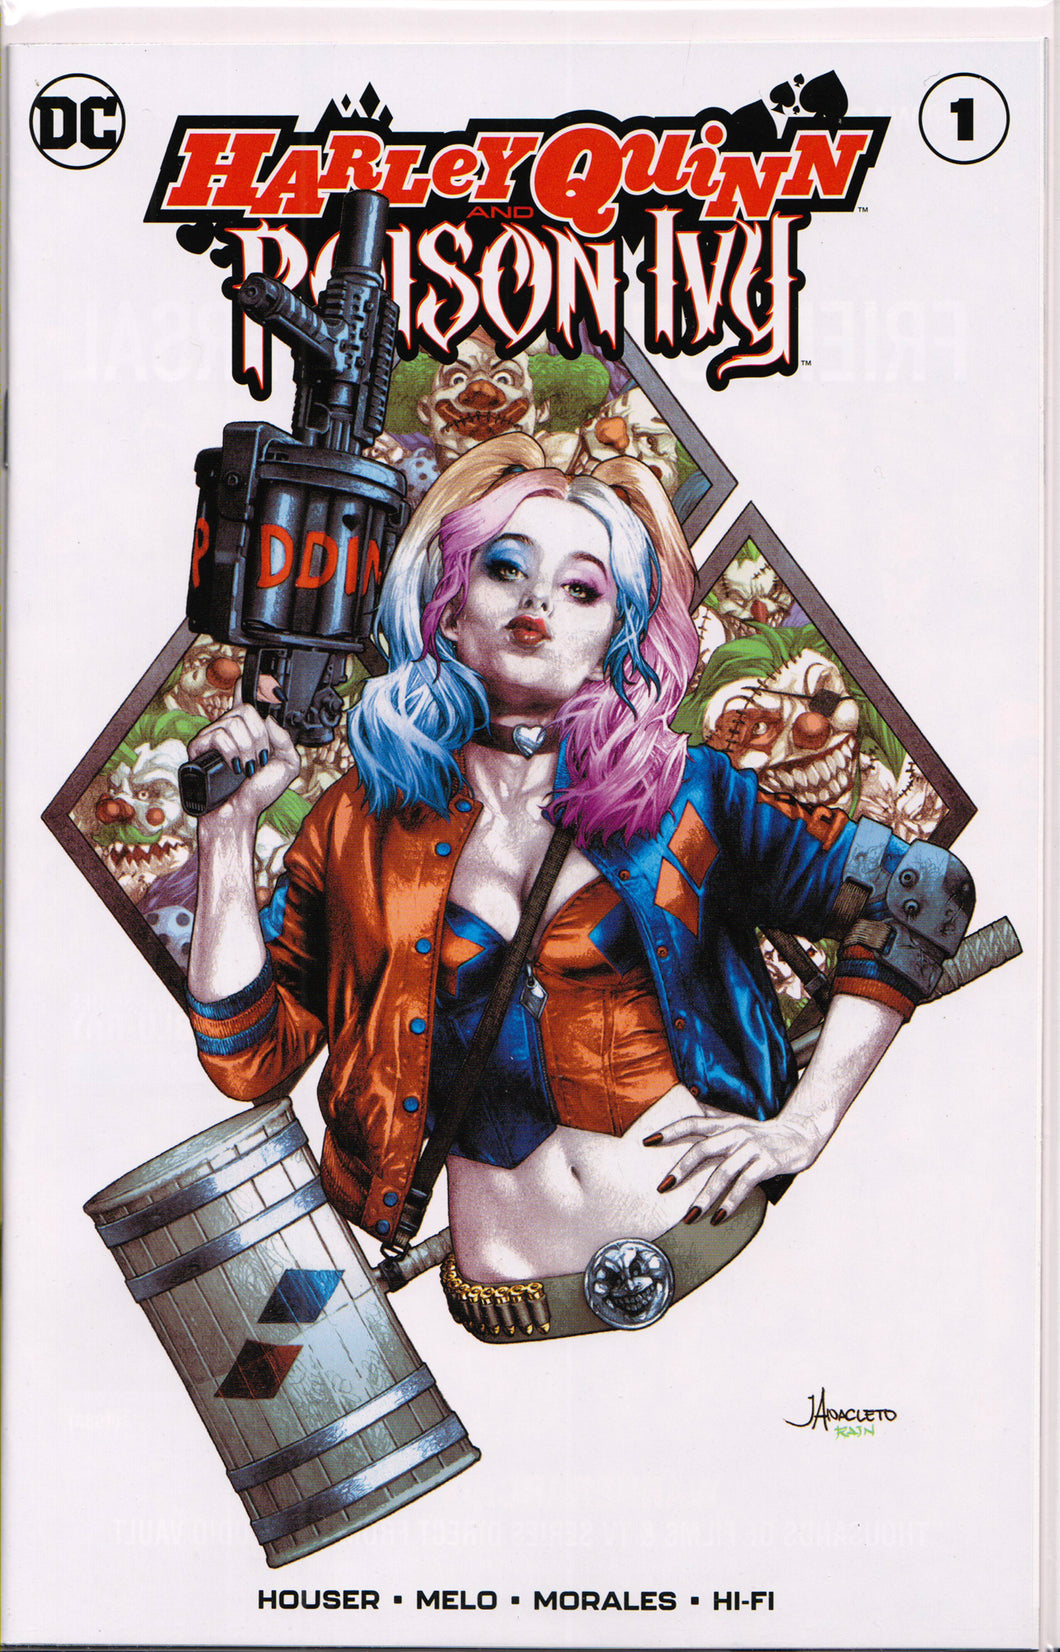 HARLEY QUINN & POISON IVY #1 (JAY ANACLETO HARLEY QUINN TRADE DRESS EXCLUSIVE COVER) ~ DC Comics